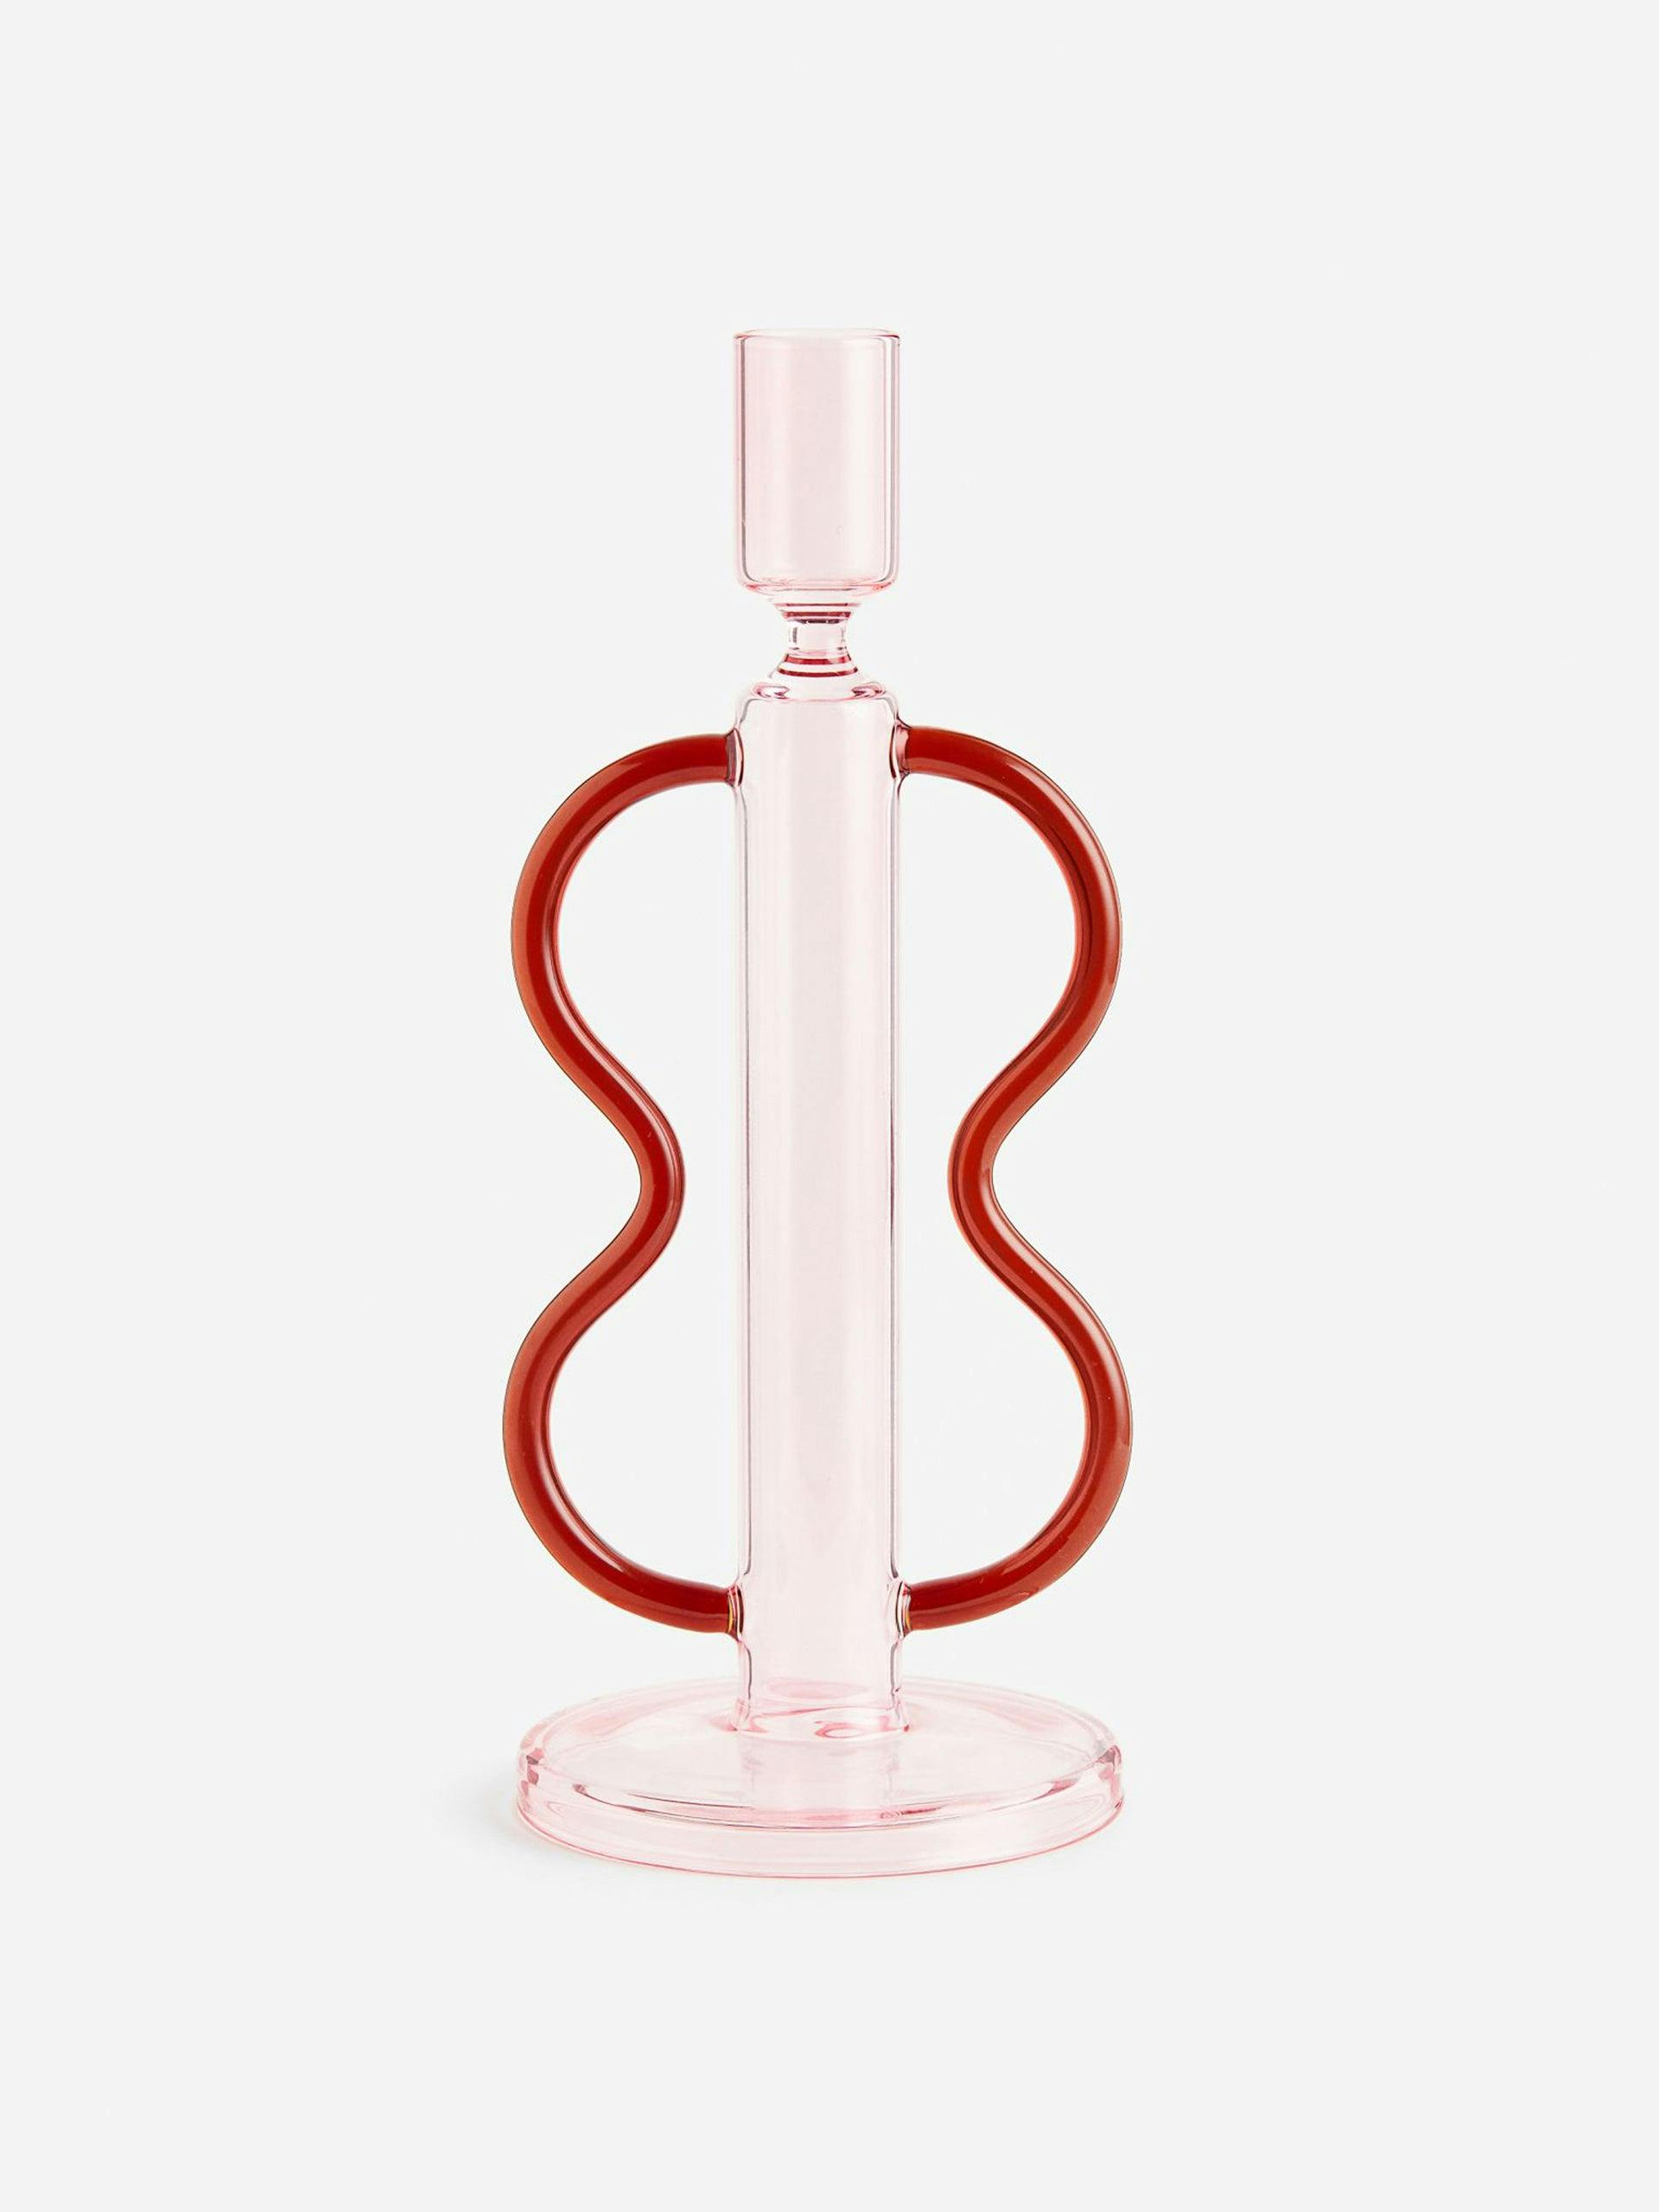 Glass candlestick with red swirl handles